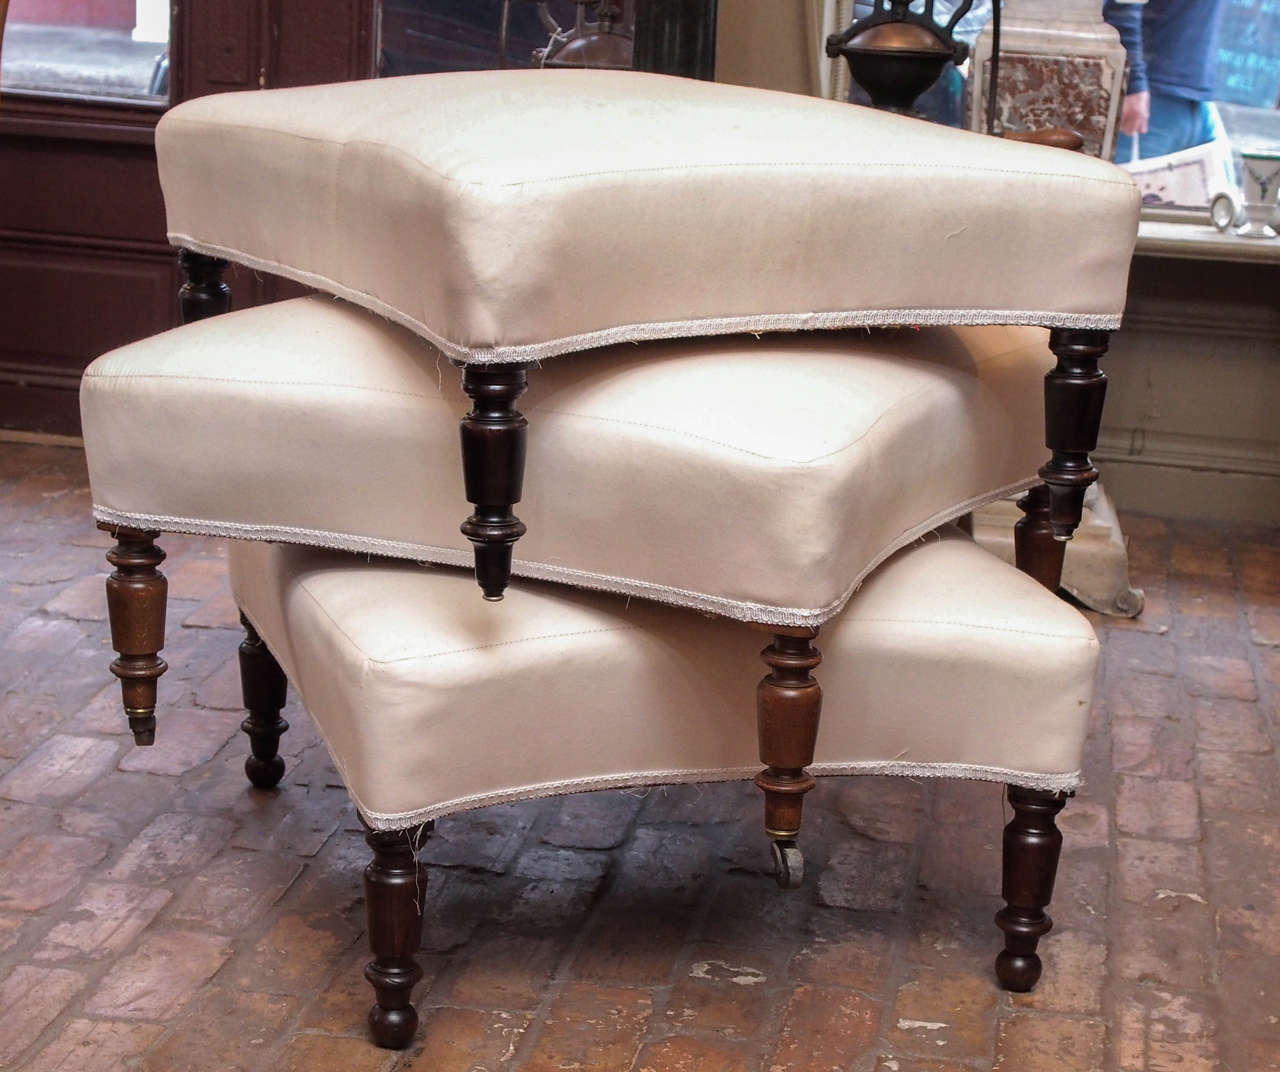 French Napoleon III period upholstered tabourets with wooden legs, circa 1860